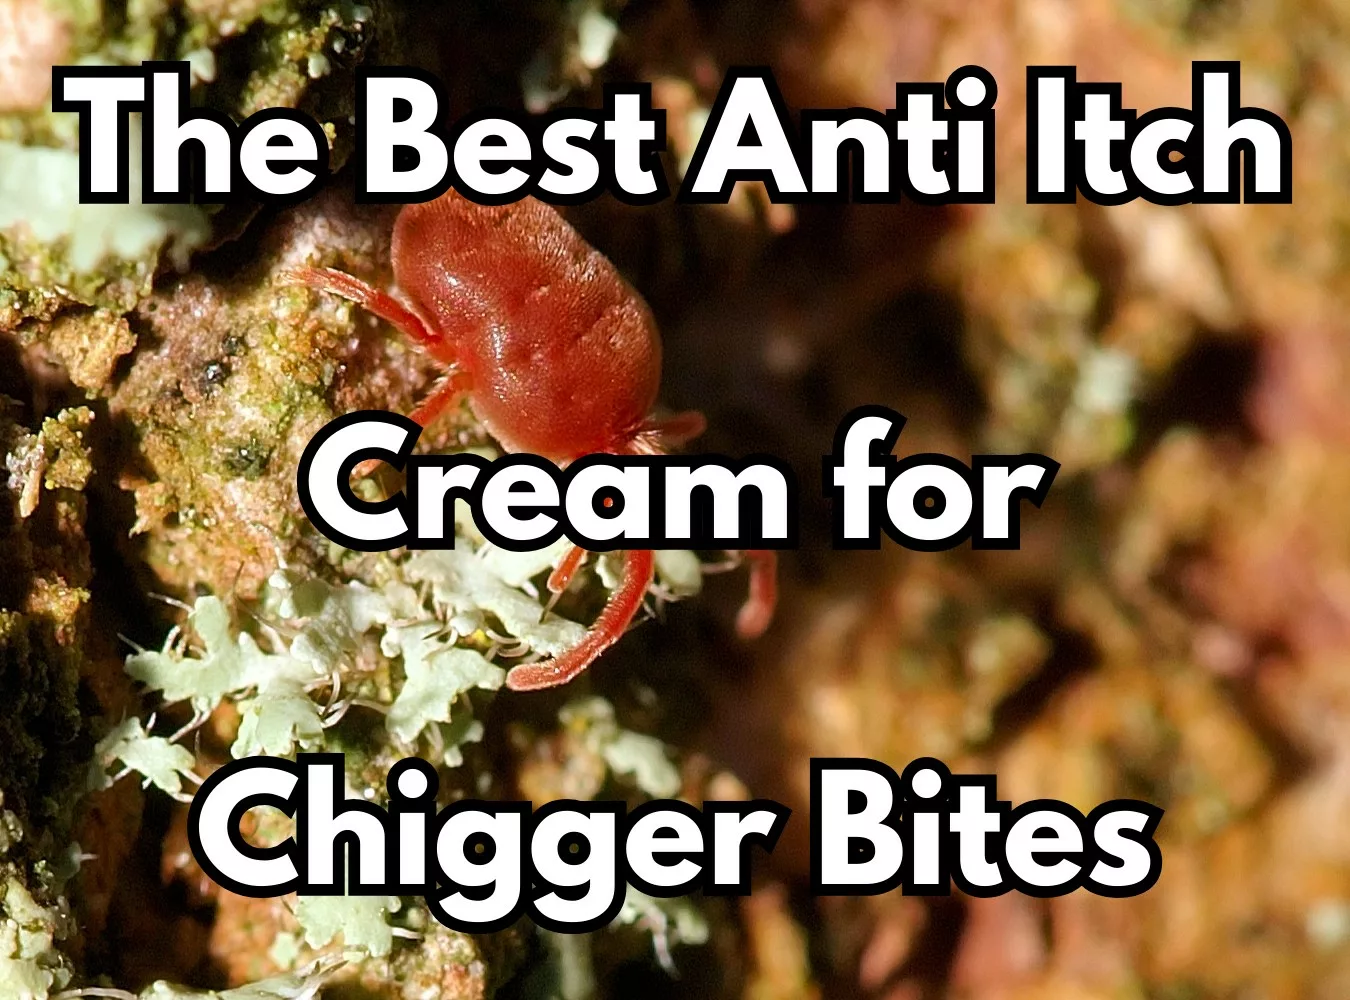 The Best Anti Itch Cream for Chigger Bites